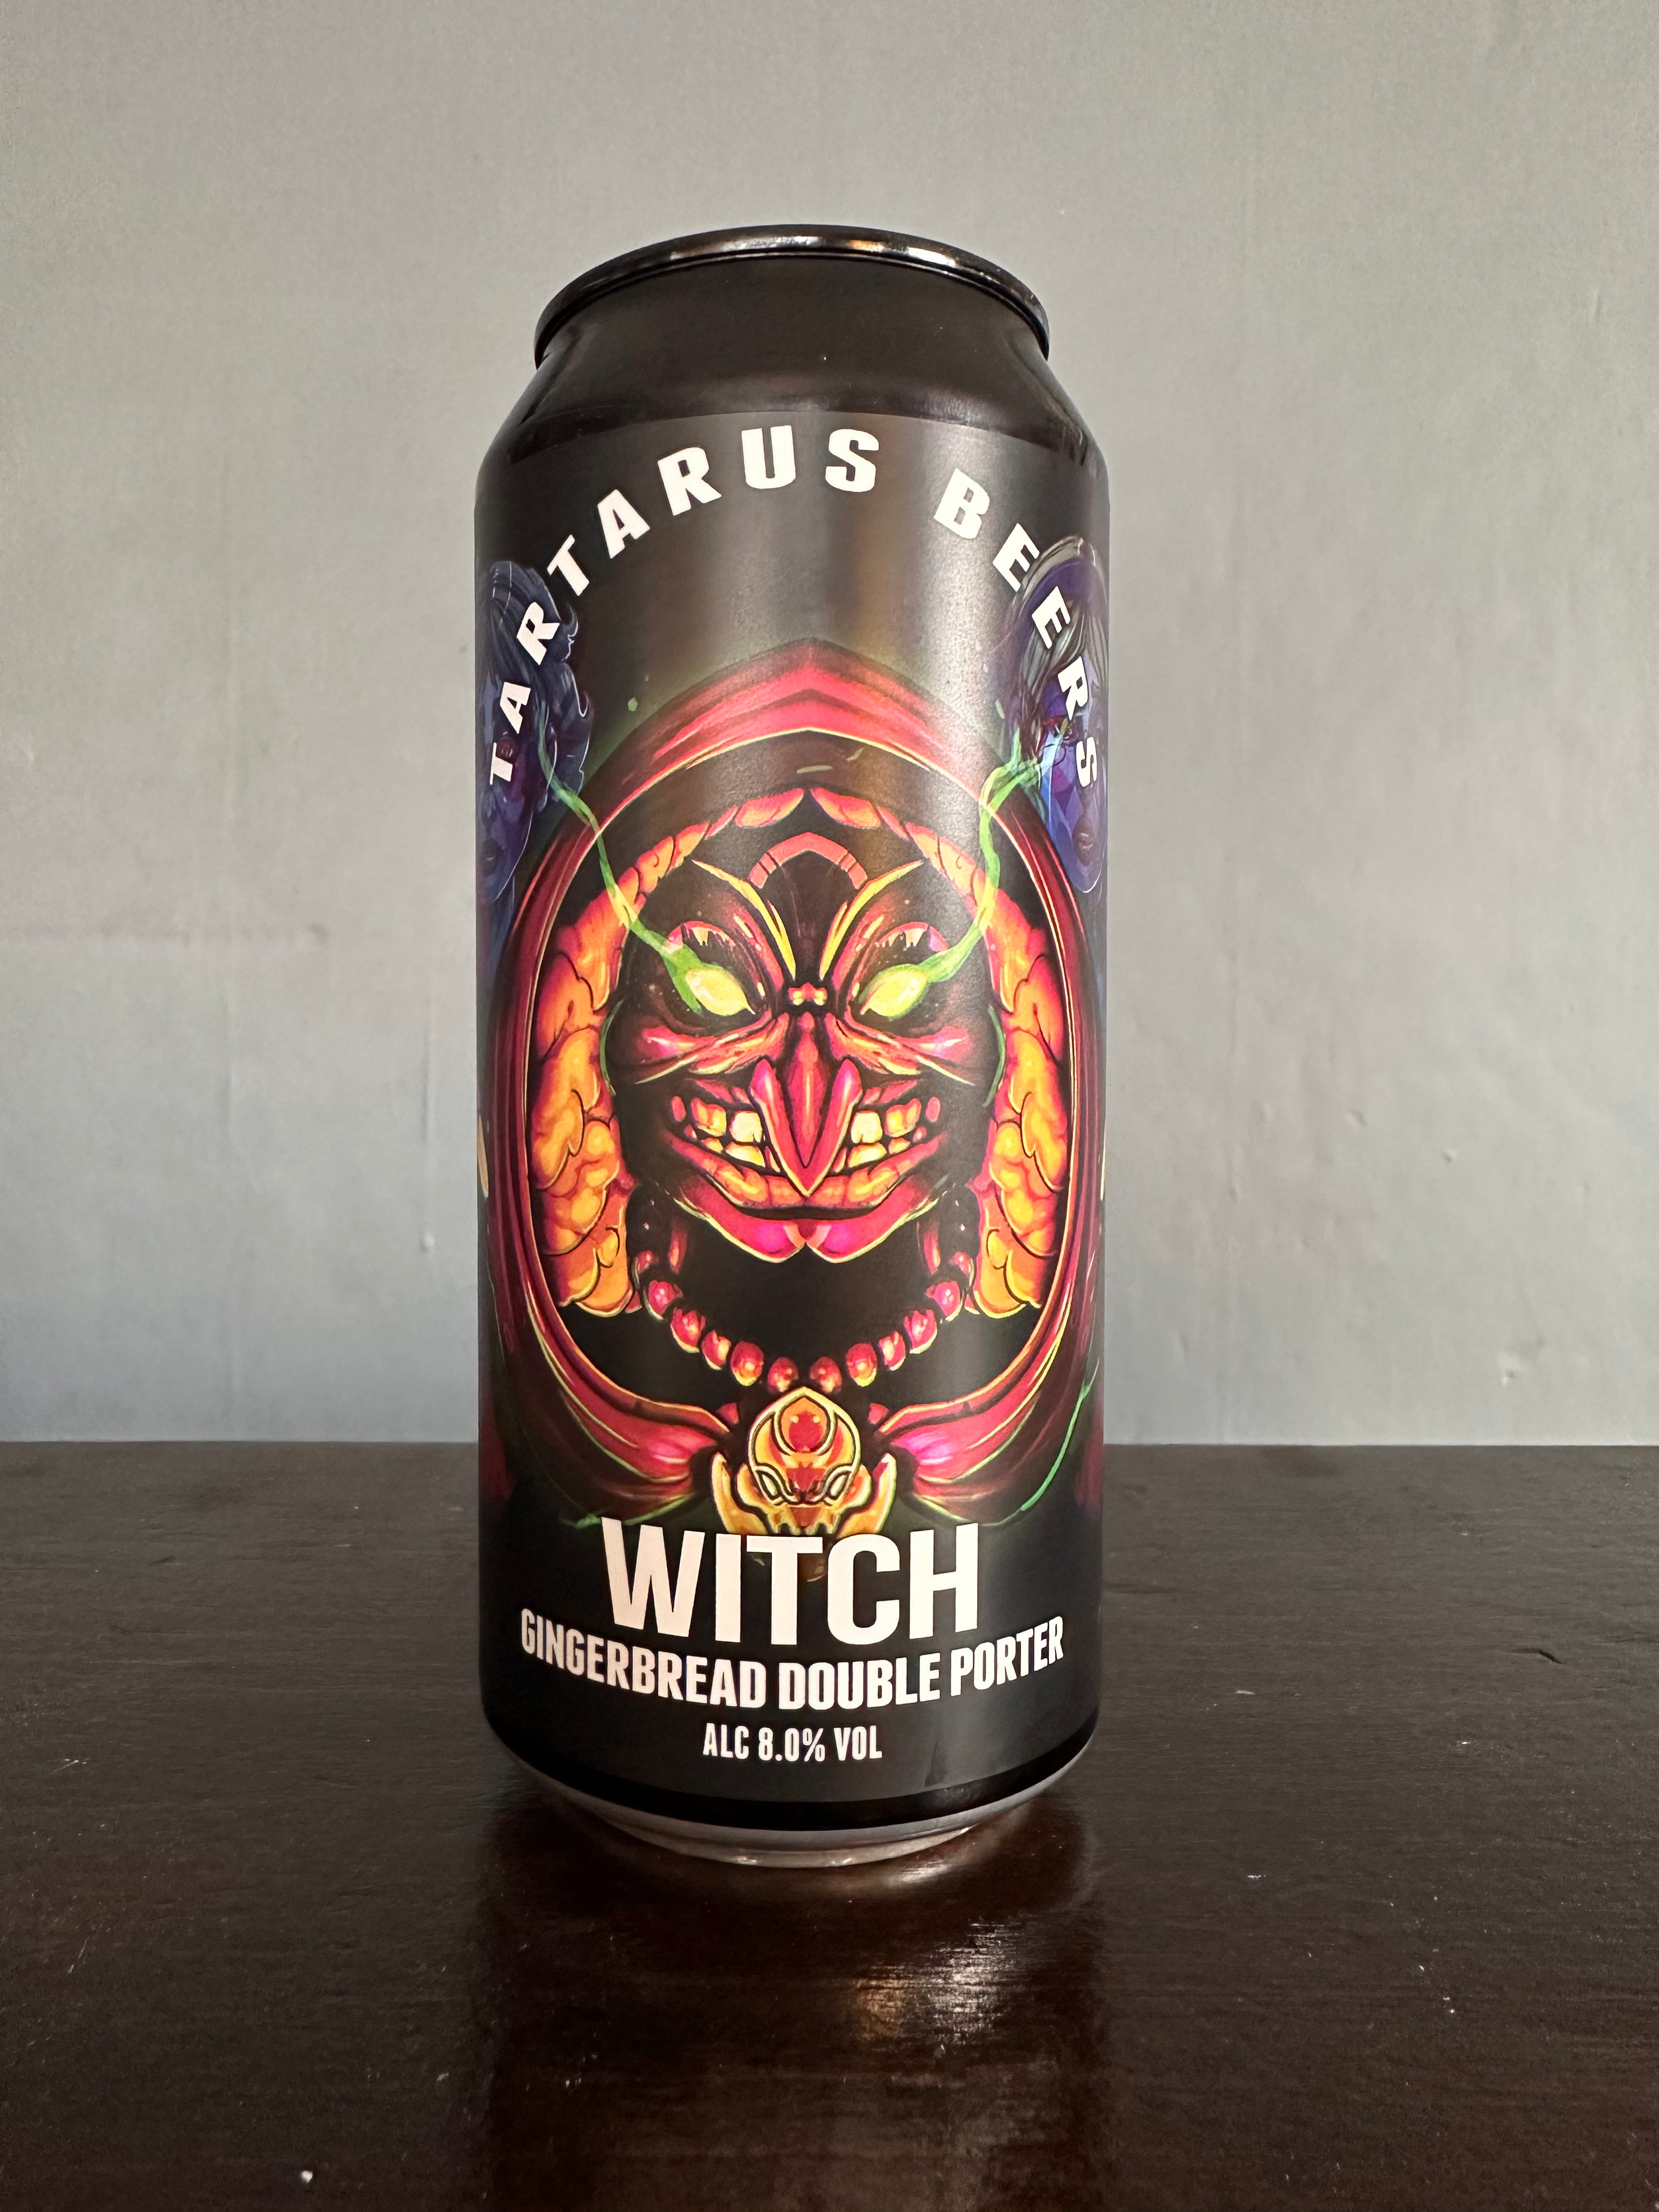 Tartarus Witch Gingerbread Double Porter 8%